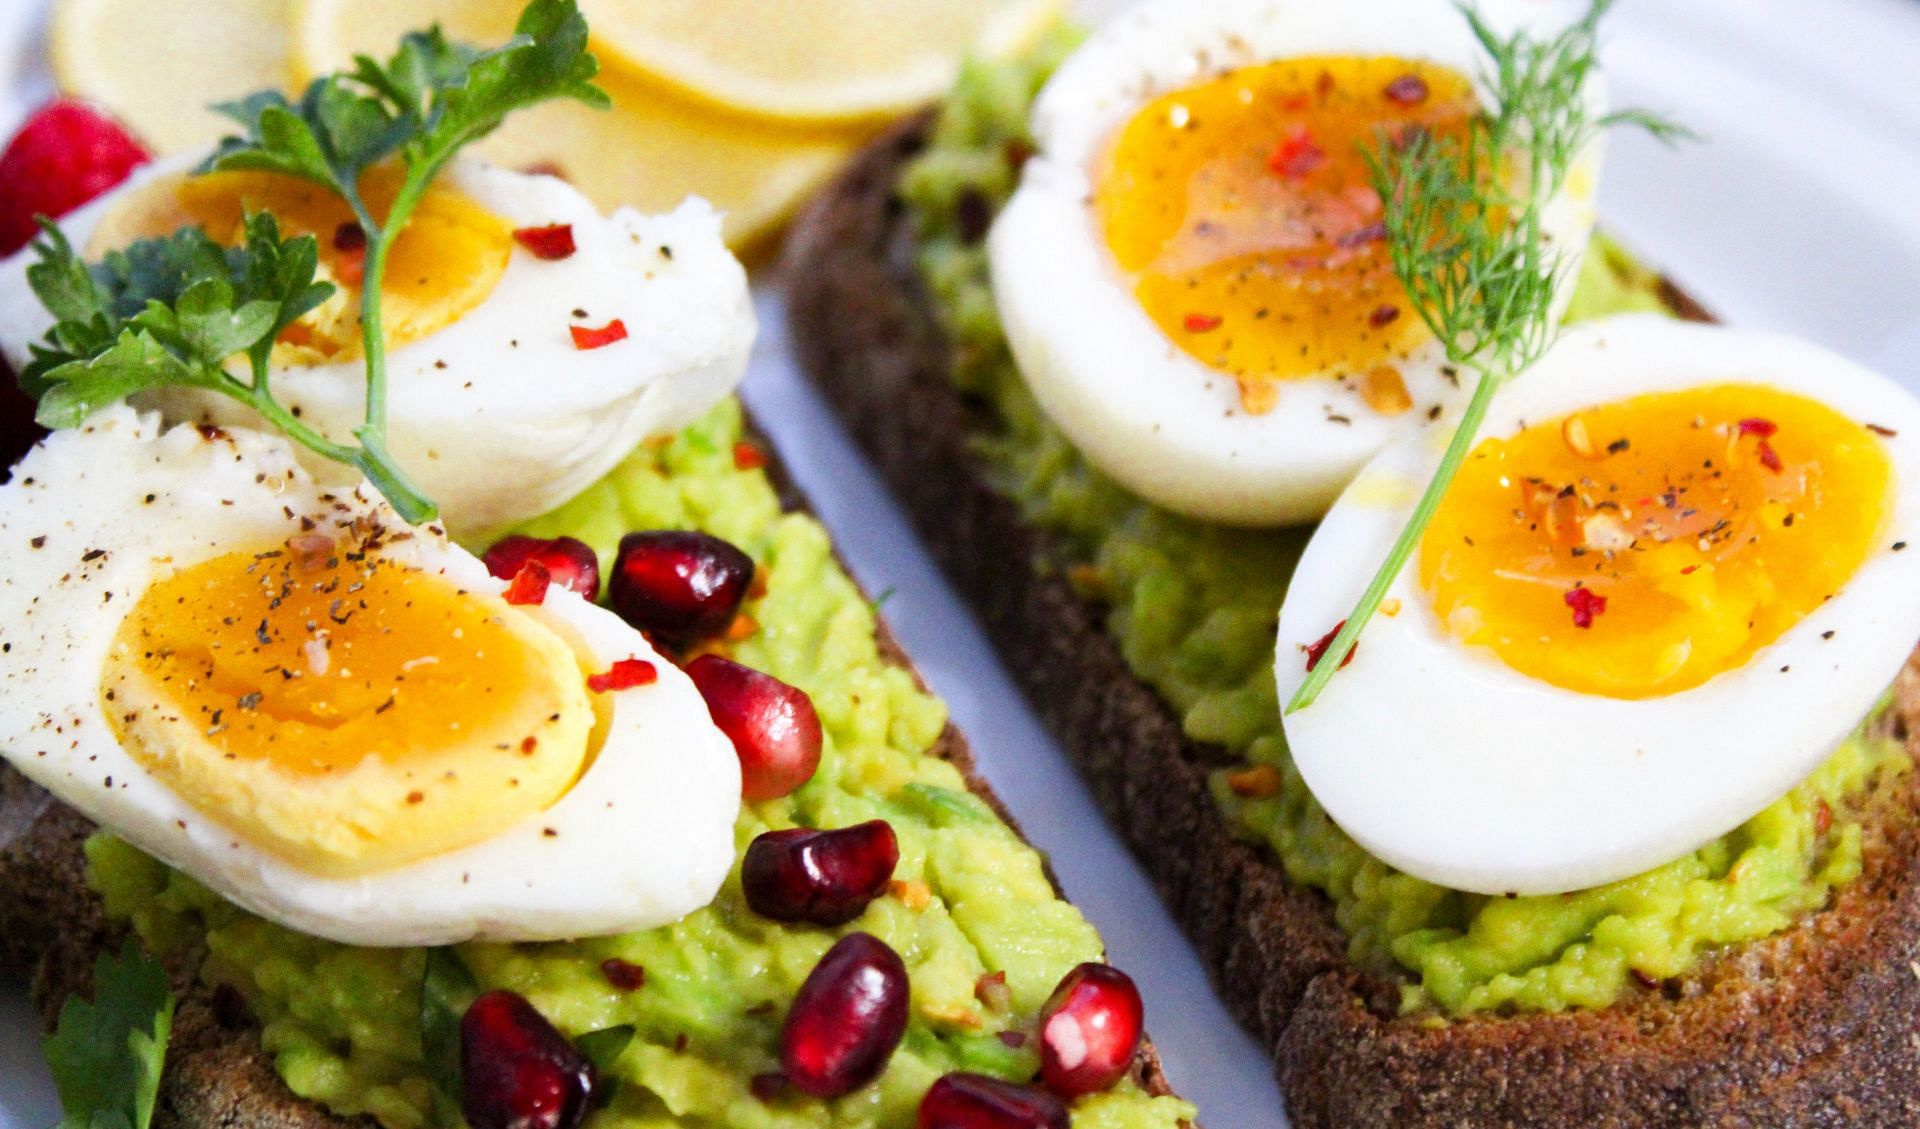 Avocado toast with eggs is an excellent breakfast option (Image via Pexels @Jane Doan)